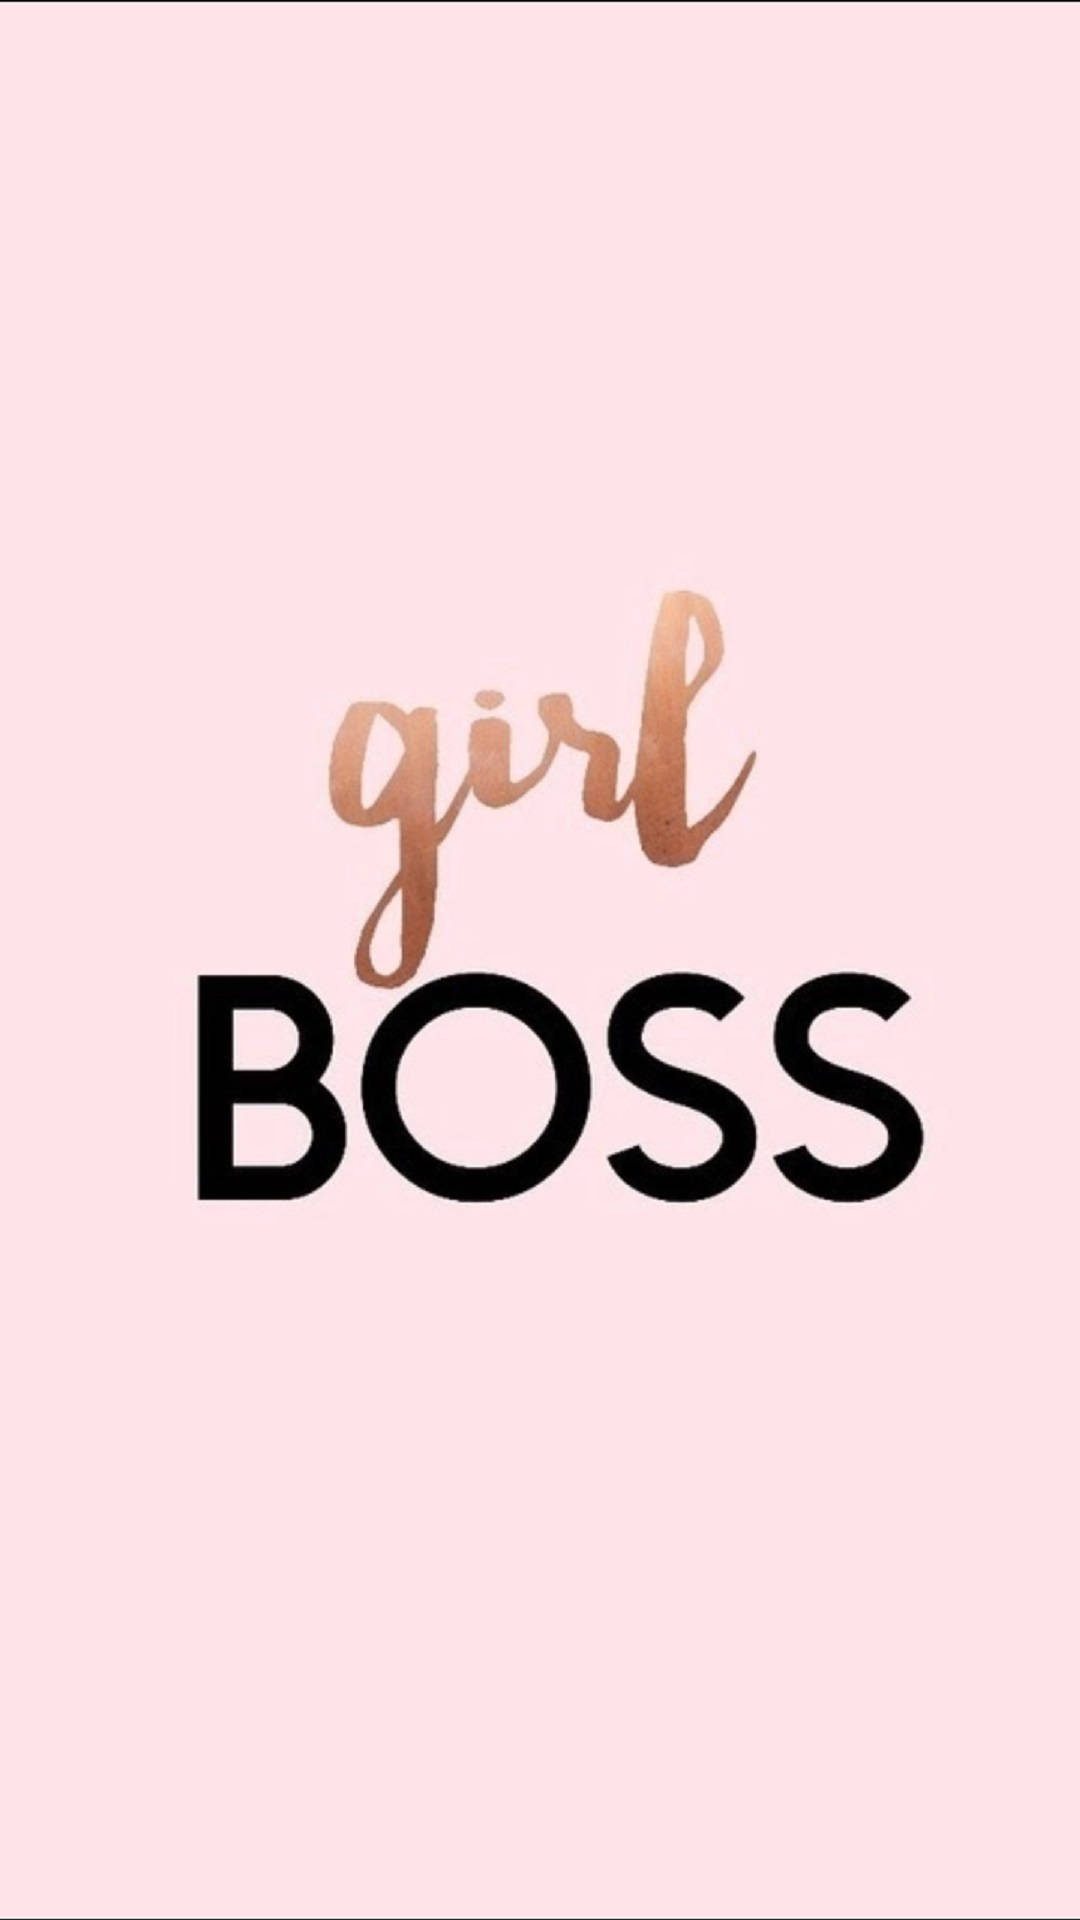 500 Boss Girl Wallpapers  Background Beautiful Best Available For  Download Boss Girl Images Free On Zicxacomphotos  Zicxa Photos